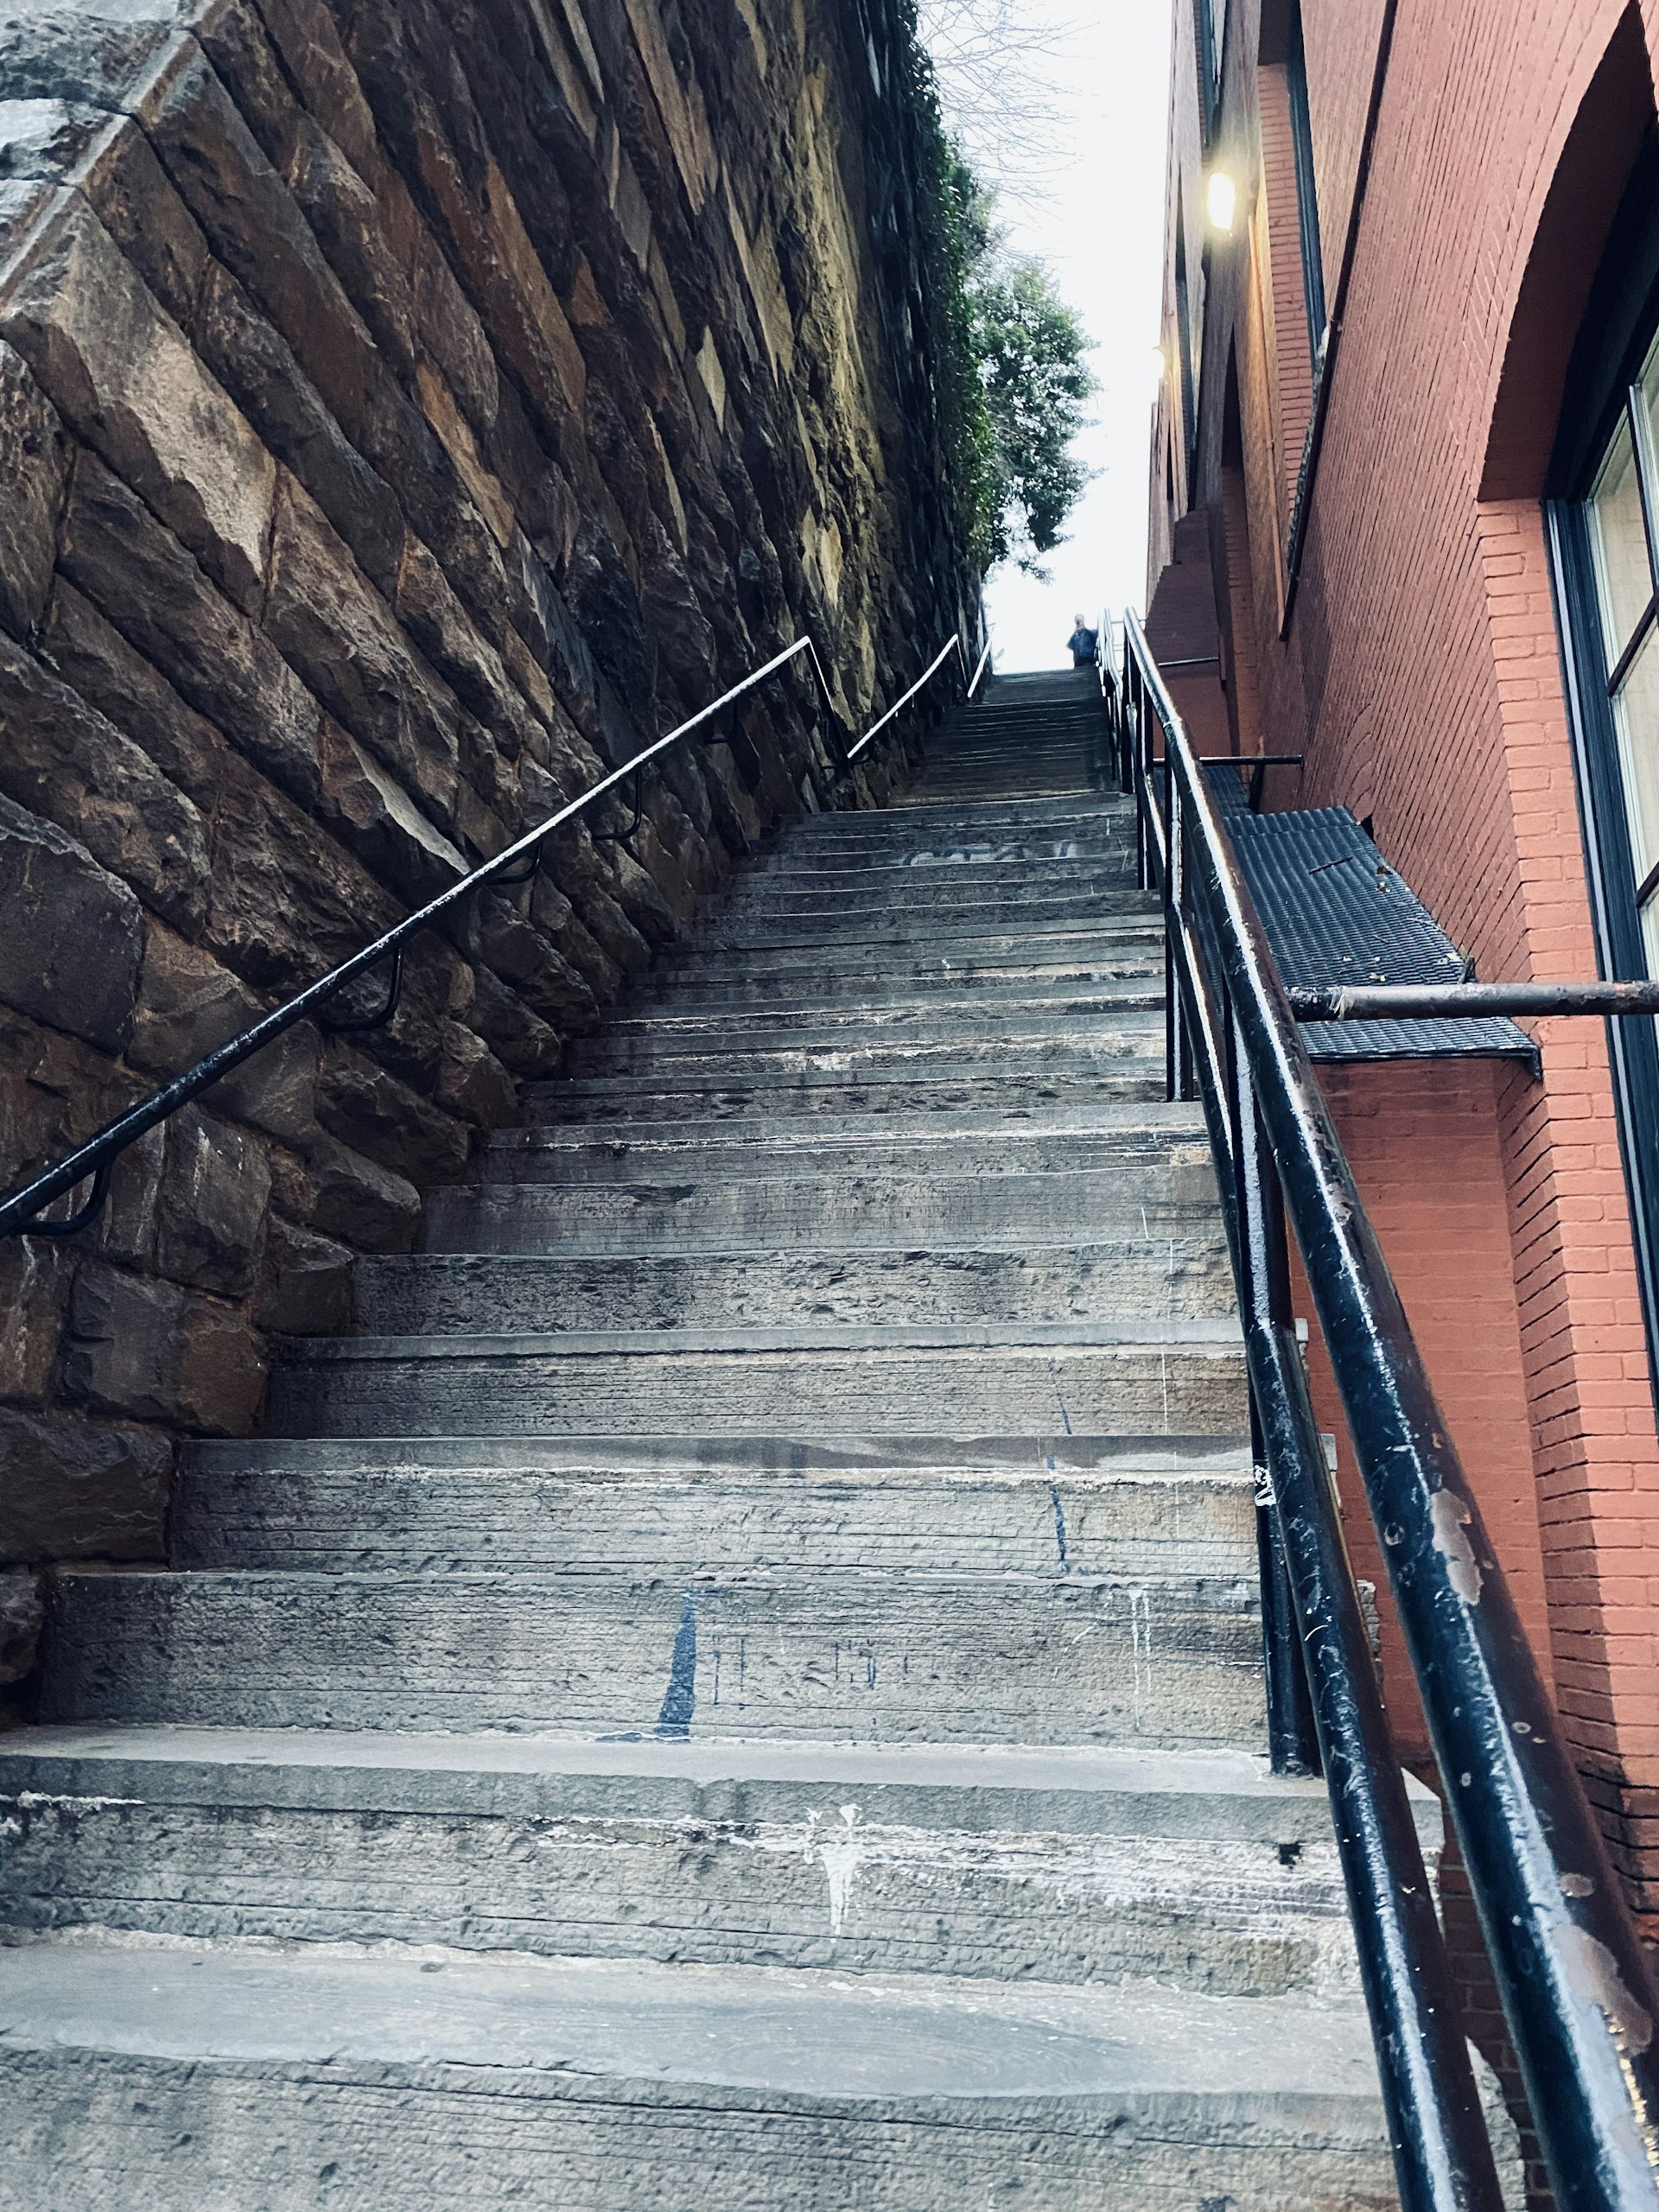 A show upwards to a set of narrow stone steps with black iron railings either side - The Exorcist Steps